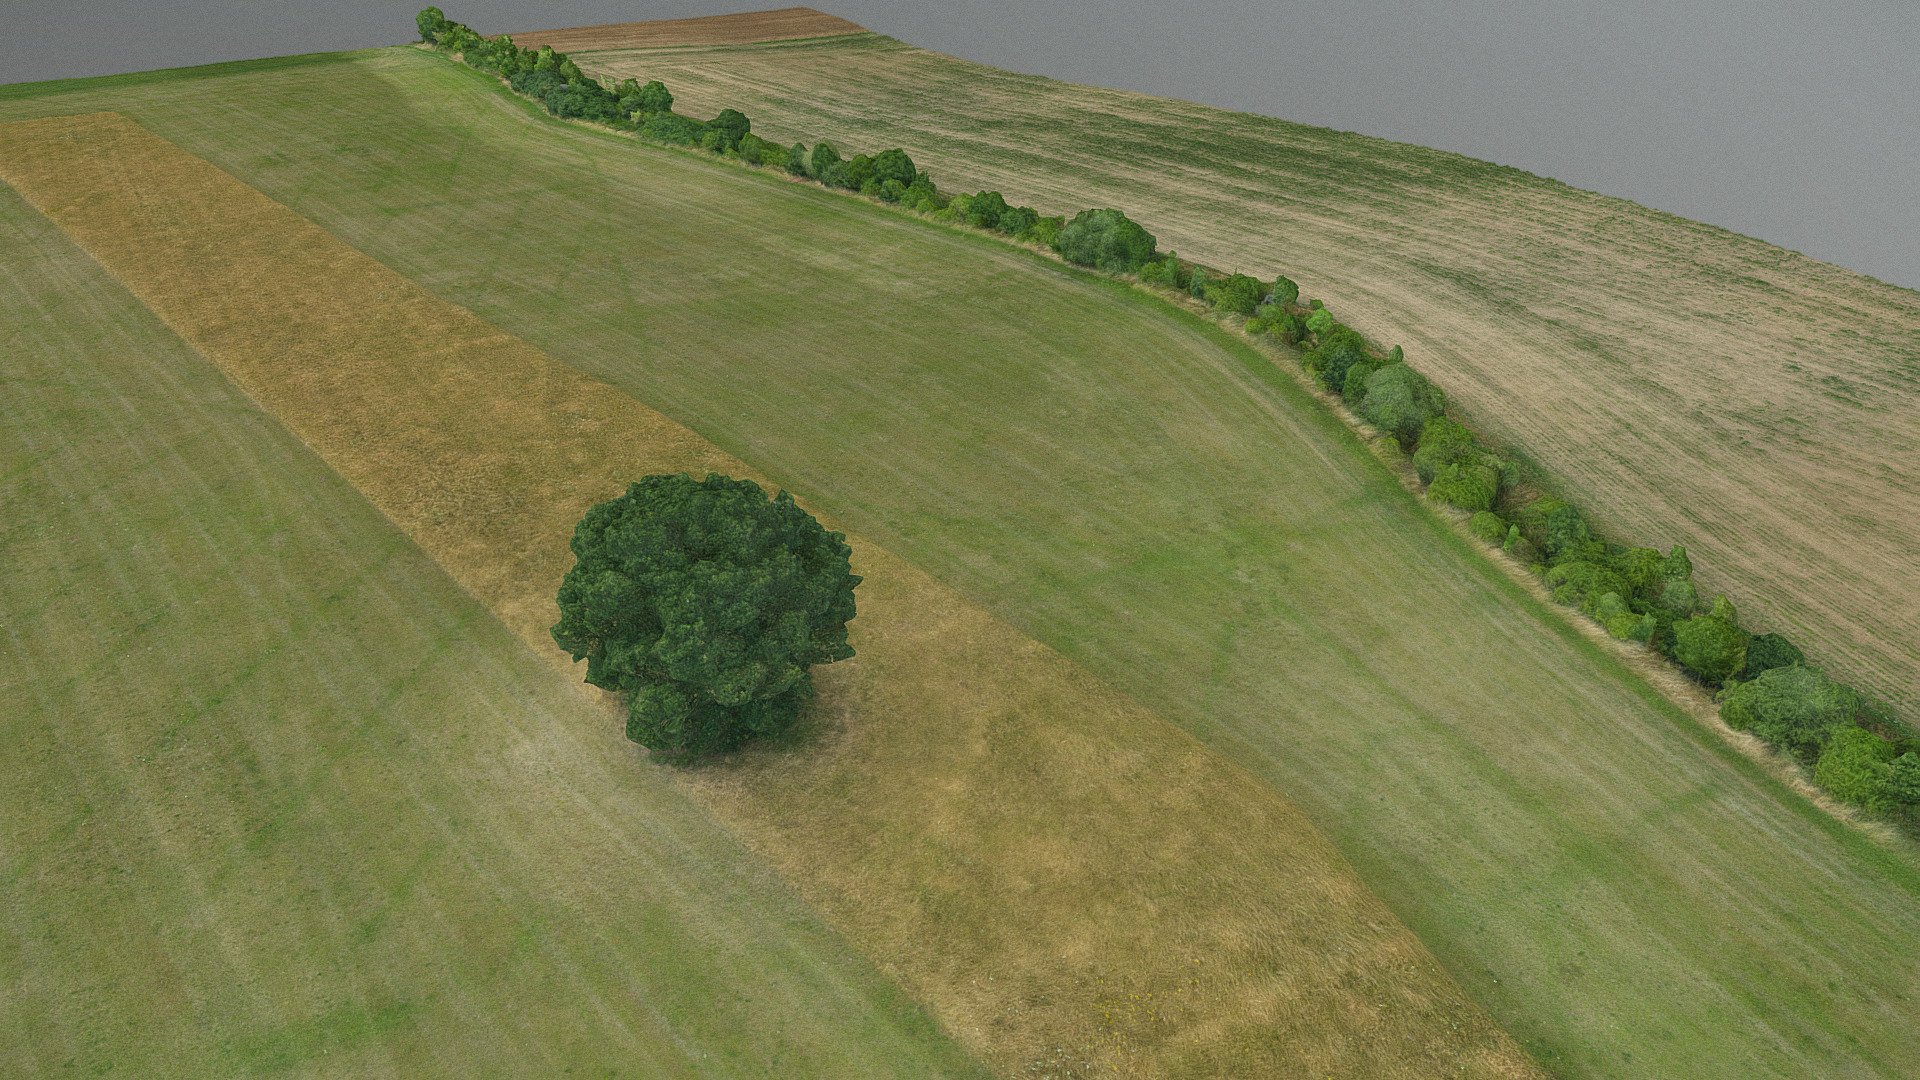 3D agriculture field crops drone aerial inspection, soil health check, irrigation conditions, wheat corn and grass meadow with some trees and road

drone photogrammetry scan (380x), 4x8k textures + hd normals 
☕ consider https://www.buymeacoffee.com/matousekfoto - 3D field inspection - Download Free 3D model by matousekfoto 3d model